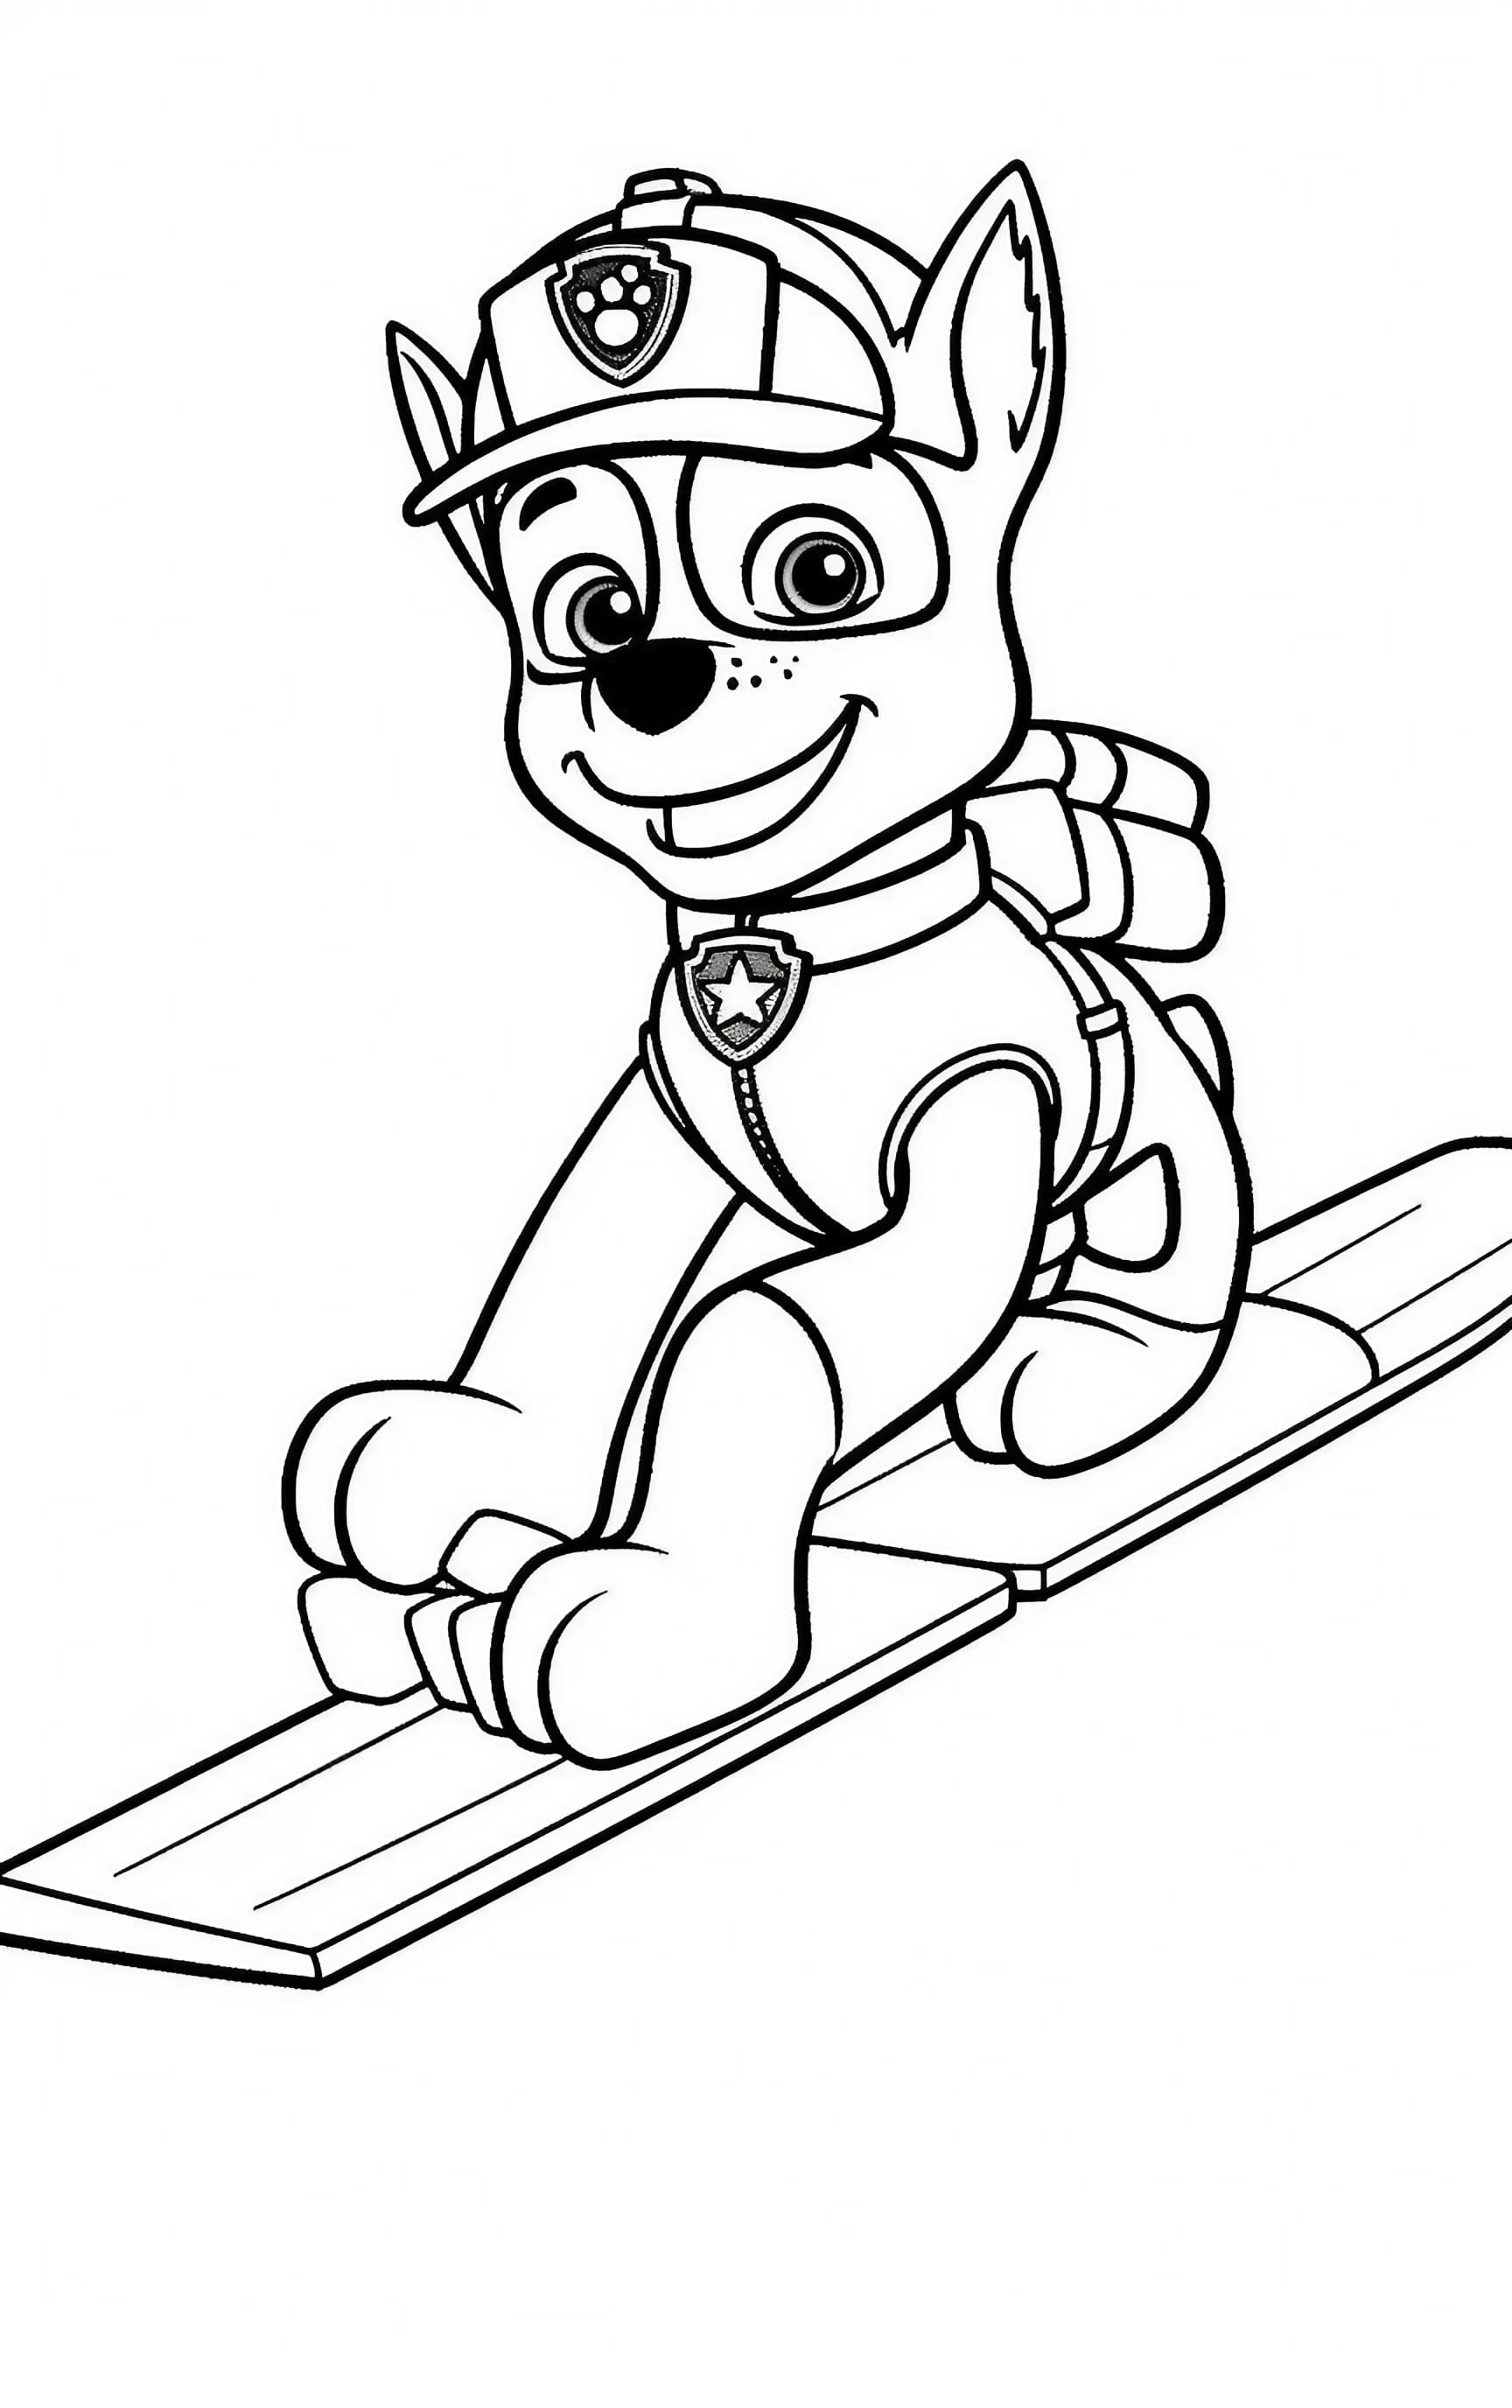 170+ Paw Patrol Coloring Pages for Action-Packed Fun 110